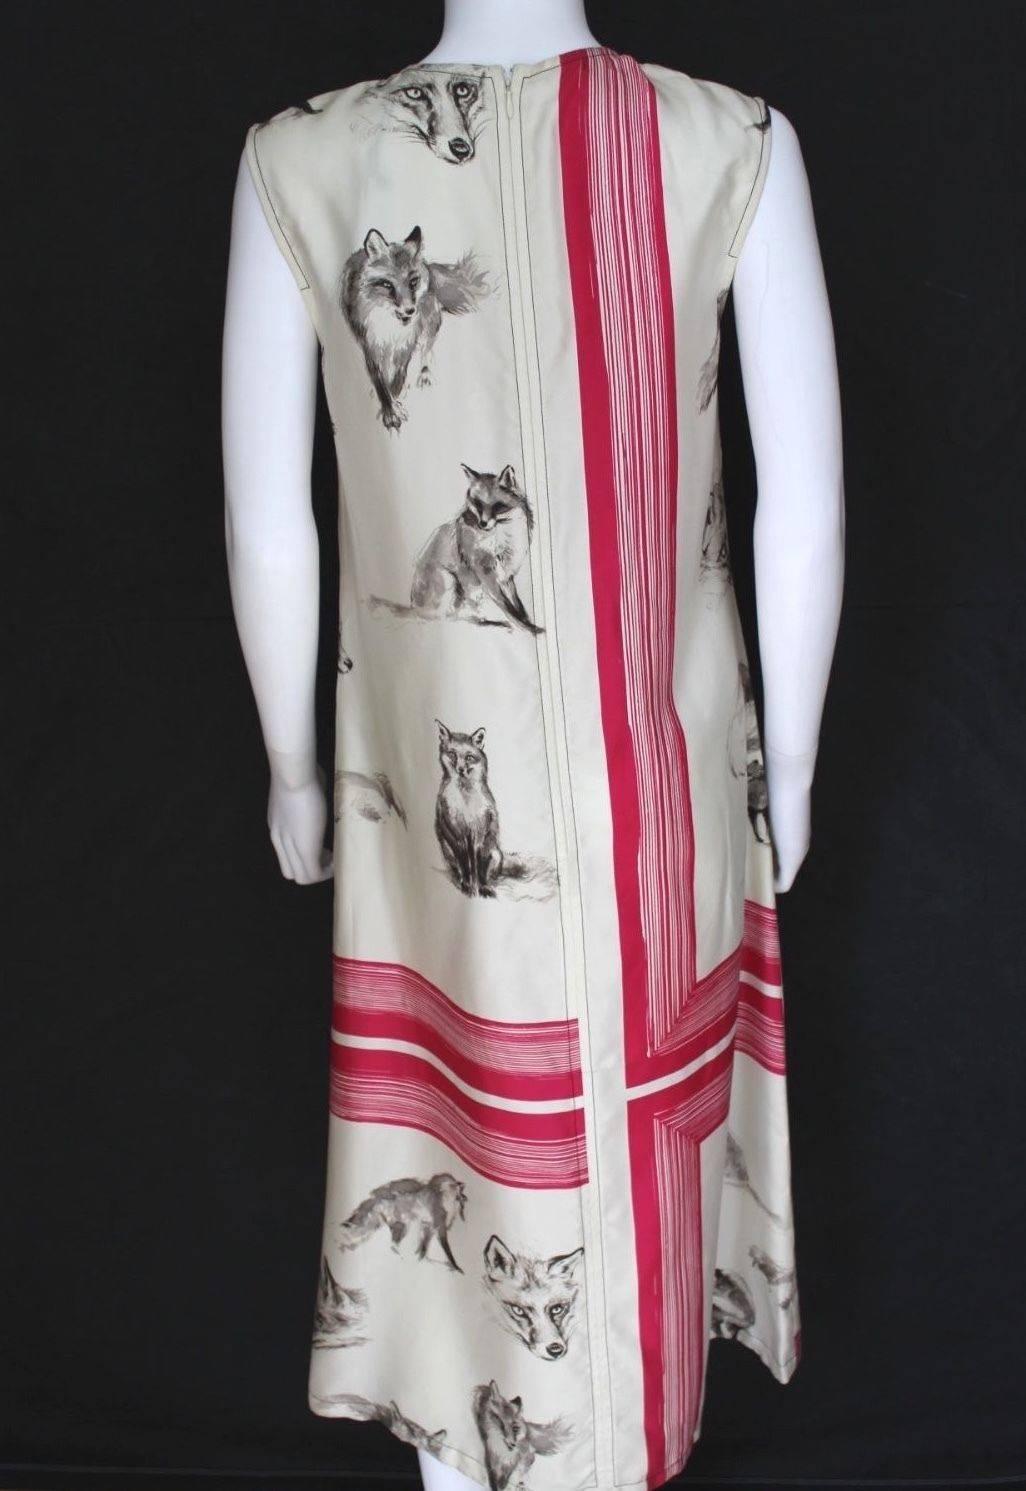 New Celine 2015 Silk Fox Print Dress F 38 uk 10 
Sleeveless silk dress with fox print and pink stripes 
Perfect for this summer , loose fit 
Length 46 inches, chest 18.5 inches across, waist 18 inches, hips 21 inches across laid flat
Excellent new